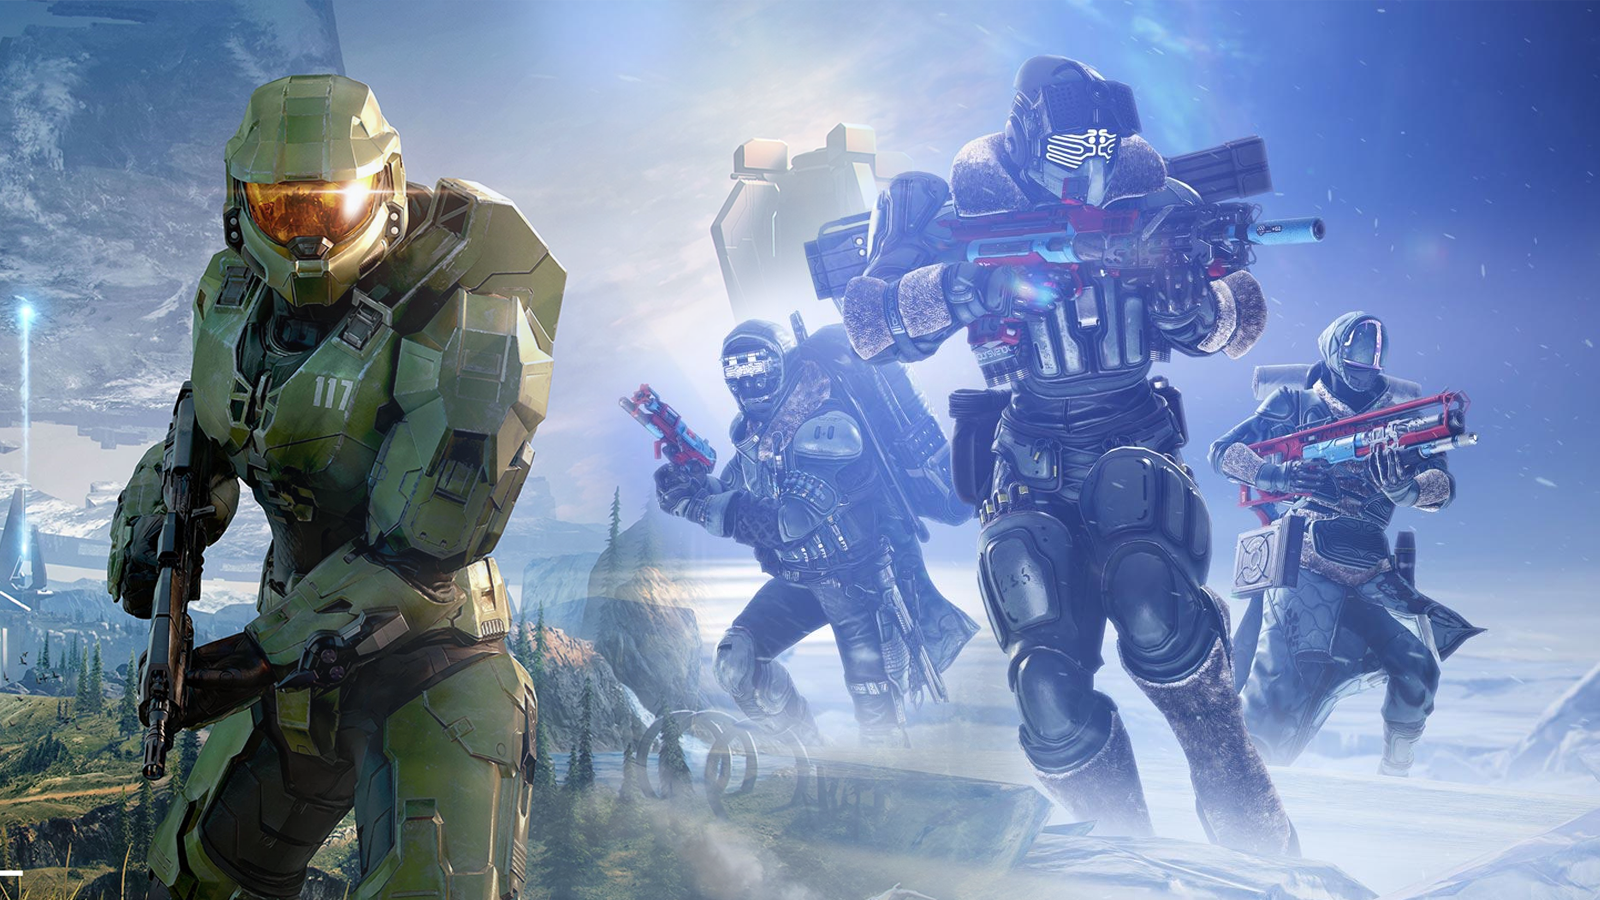 Destiny 2 Halo Crossover Is On The Way, Says Leaker | GGRecon